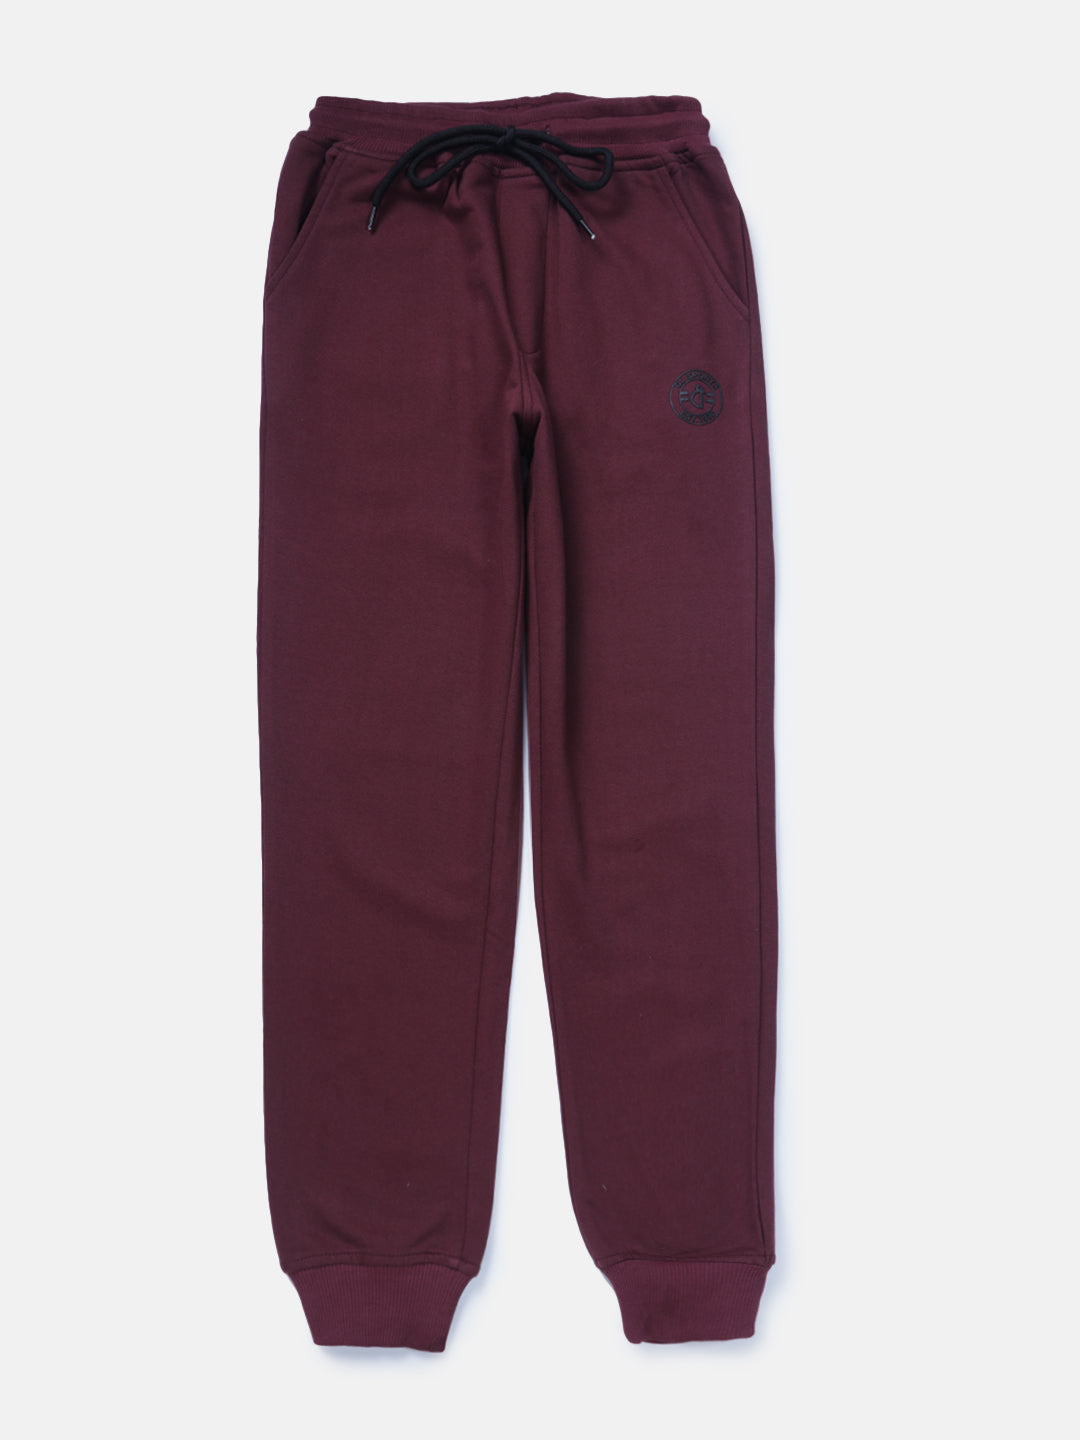 Boys Maroon Solid Knits Track Pant